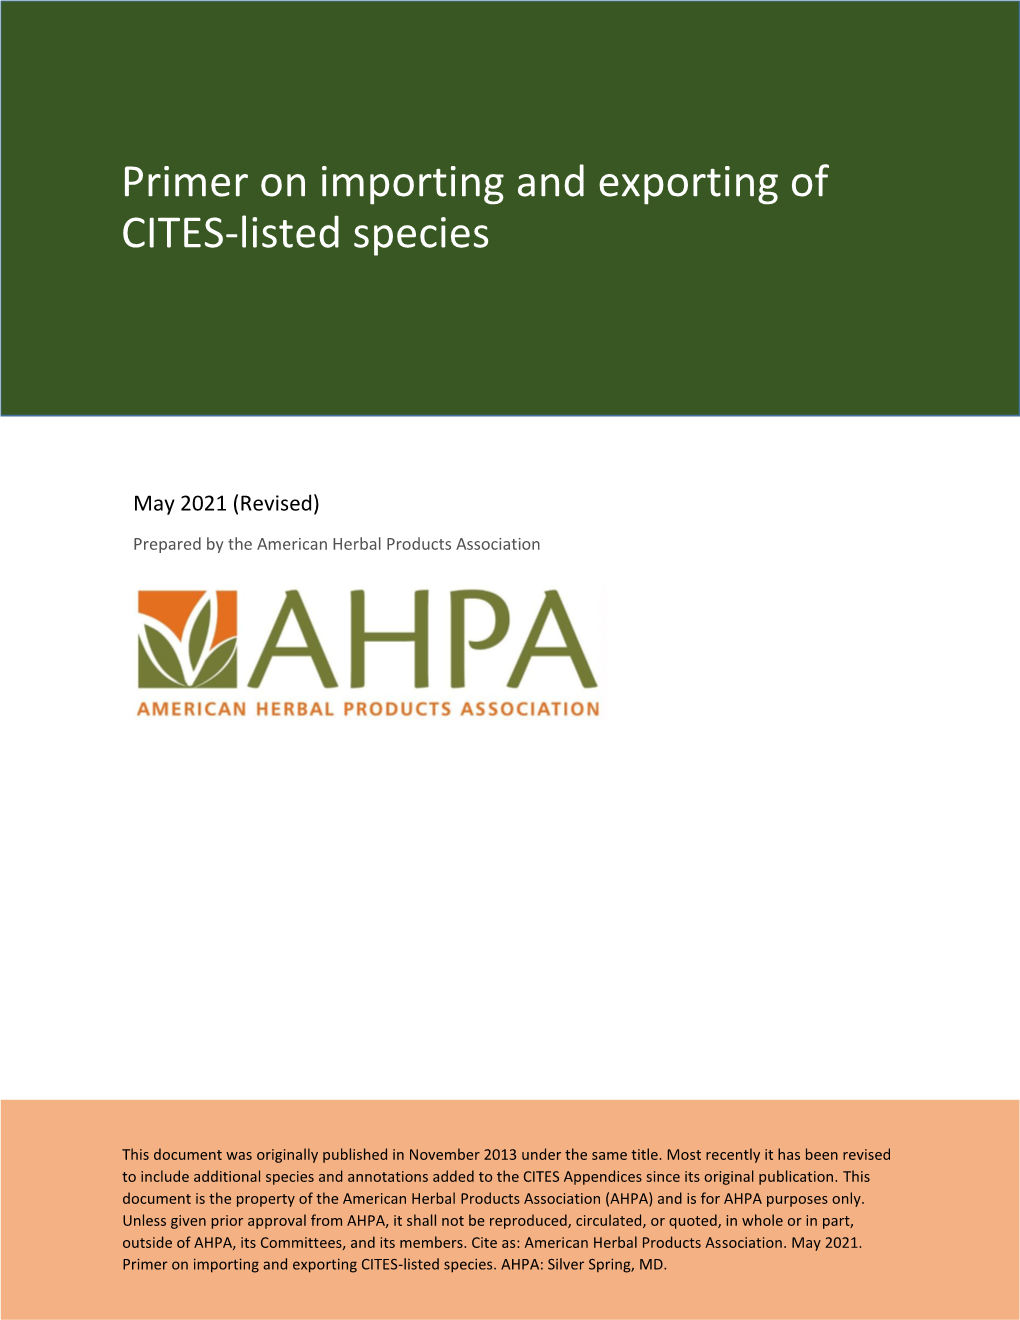 Primer on Importing and Exporting of CITES-Listed Species